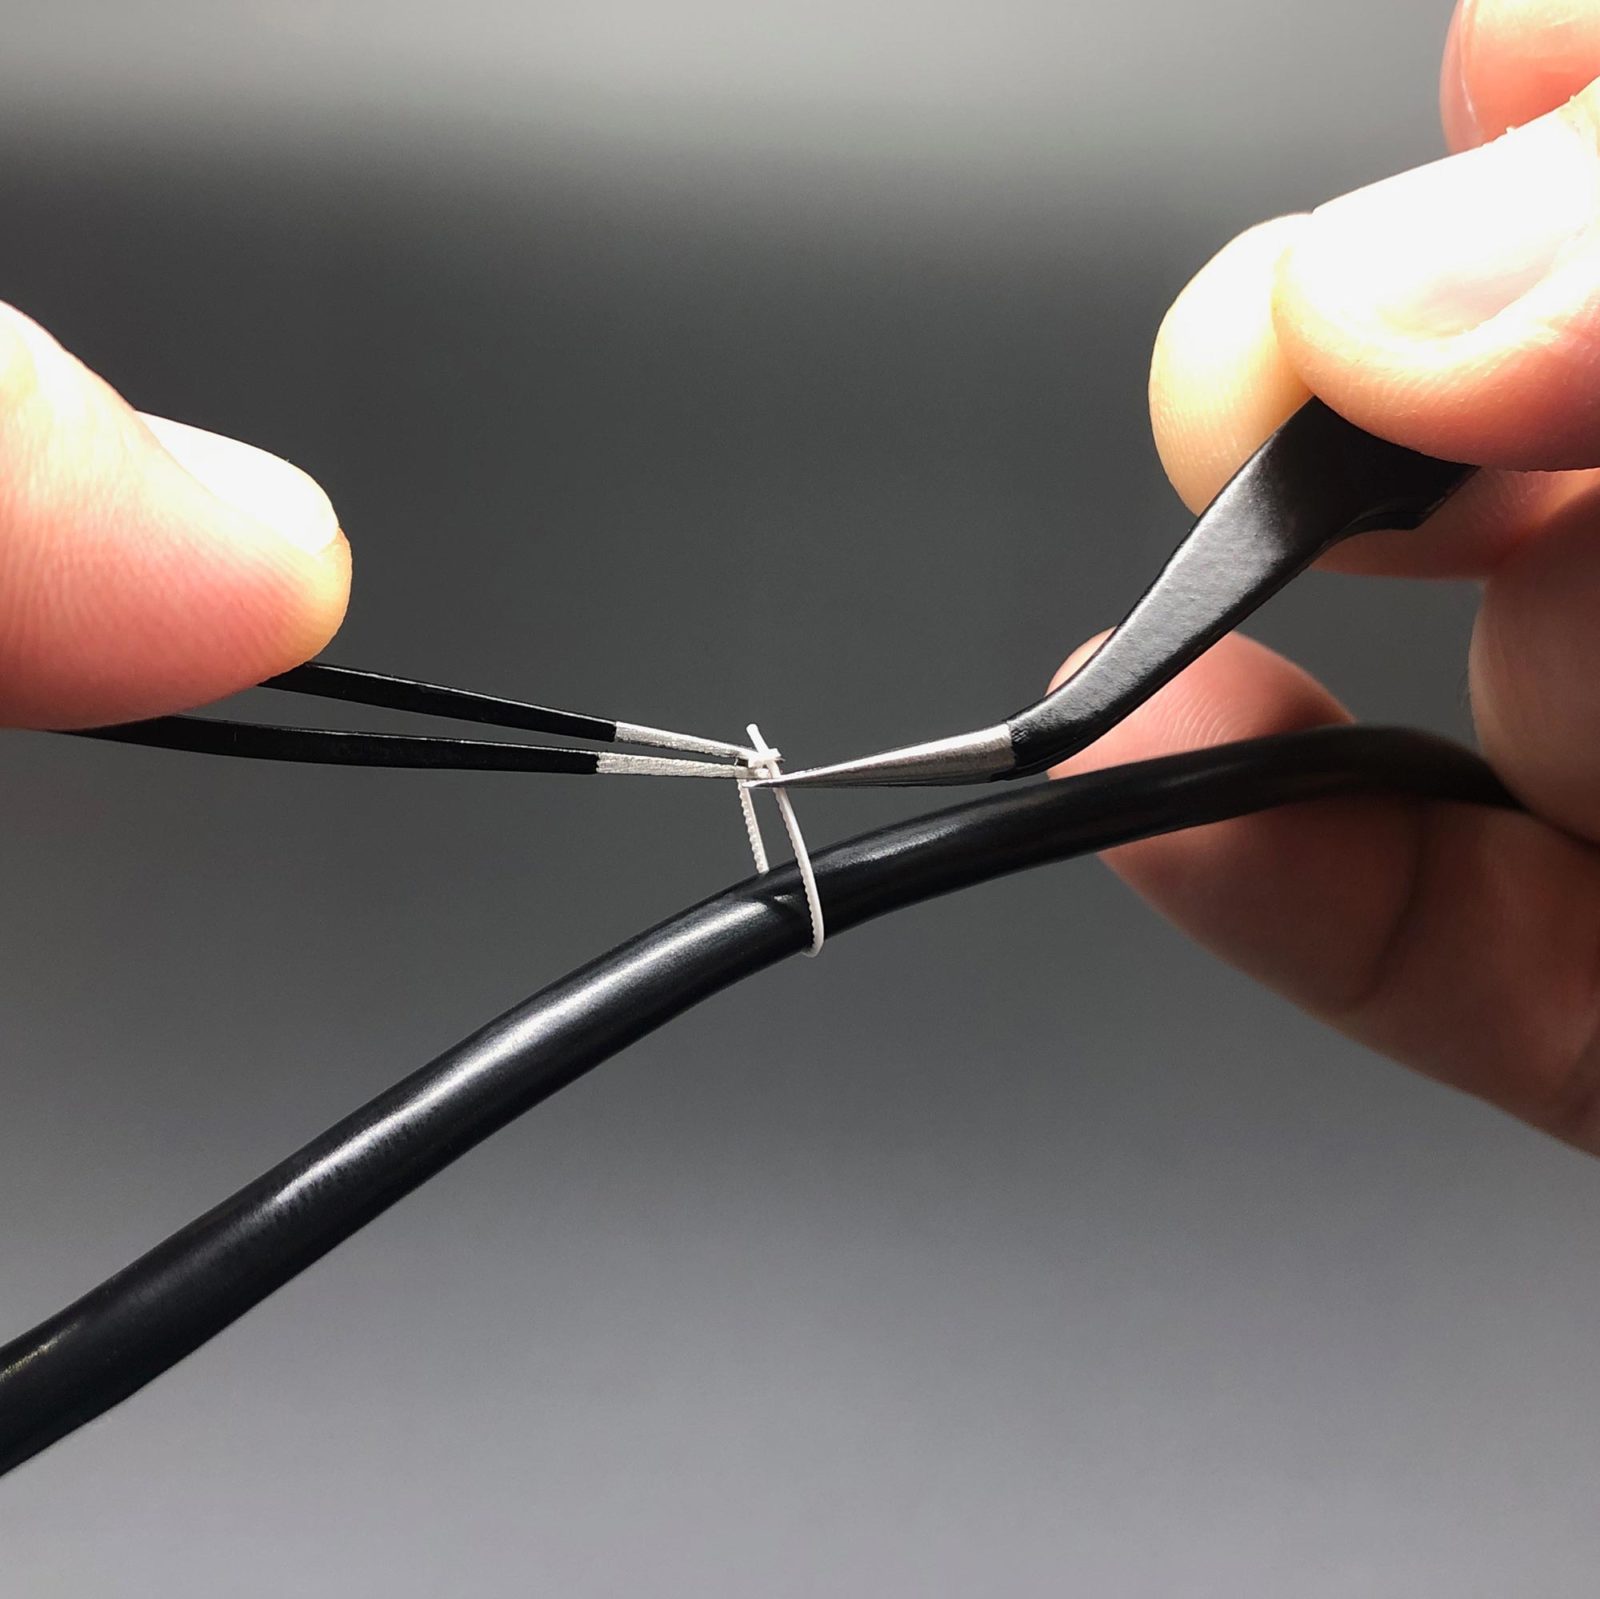 Closing Mini Cable Ties with tweezers